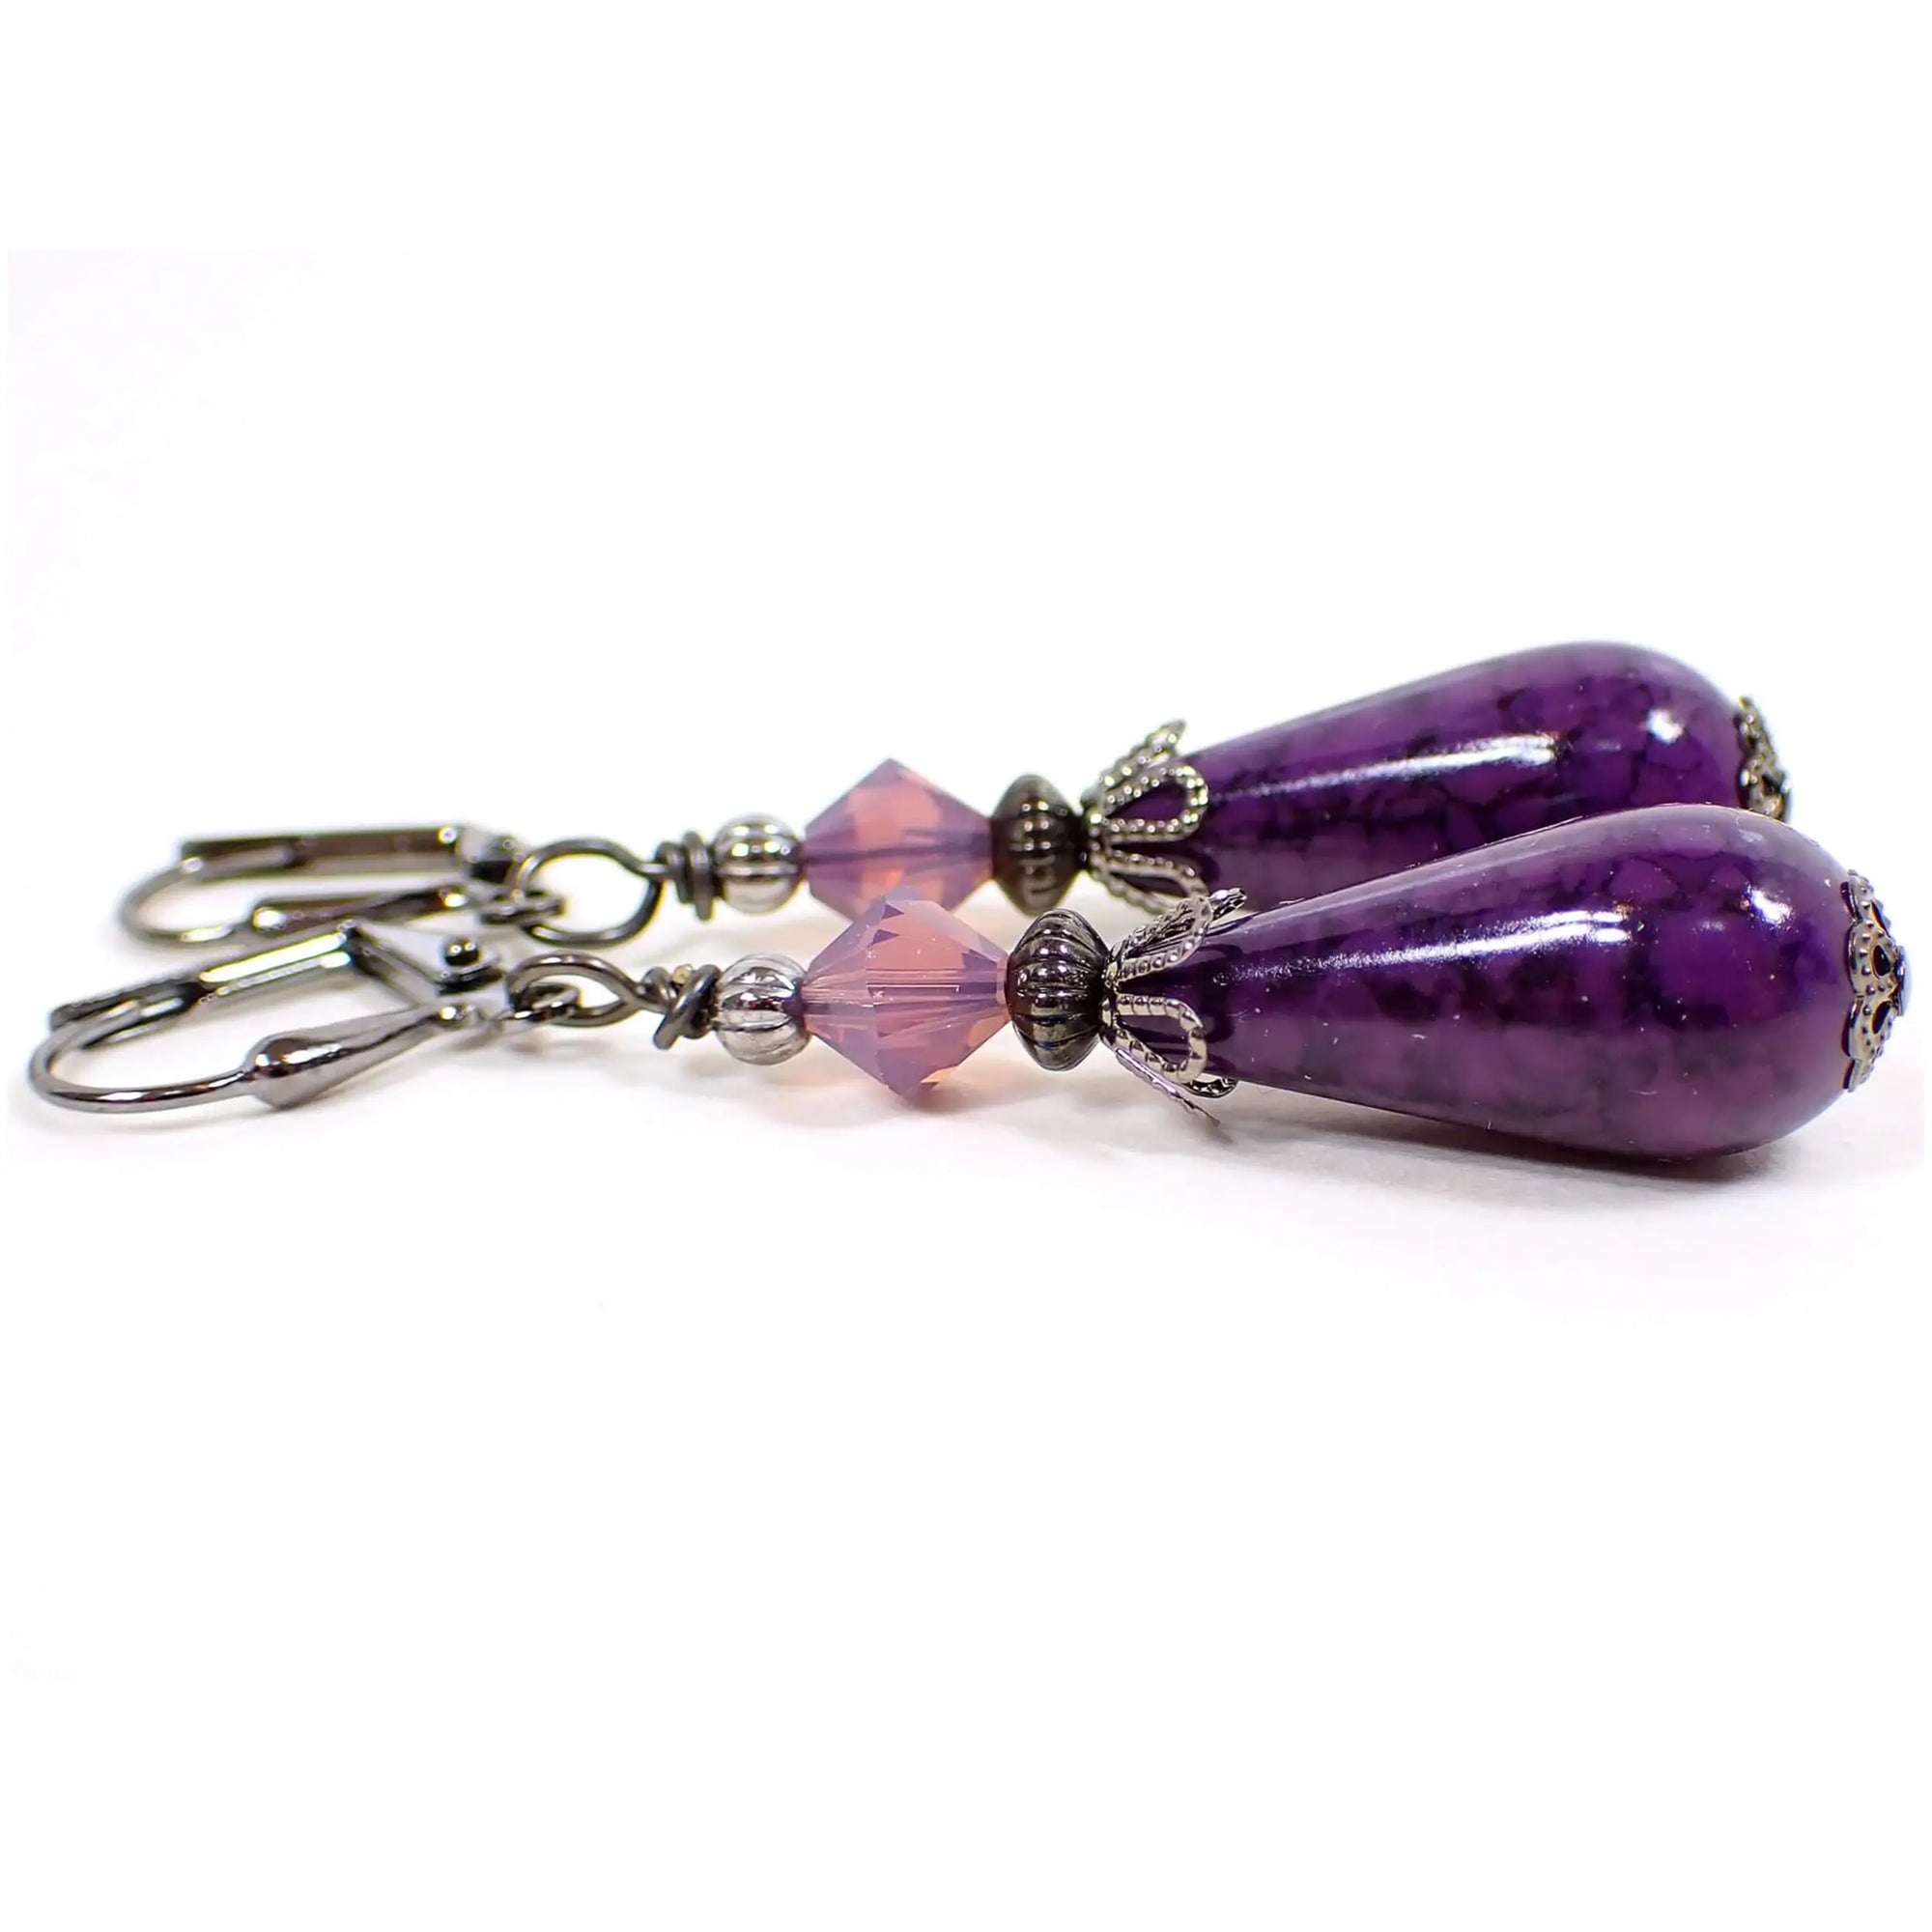 Side view of the handmade teardrop earrings with vintage German acrylic beads. The metal is gunmetal gray in color. There are semi translucent light purple glass crystal faceted beads at the top. The bottom acrylic beads are teardrop shaped and have a marbled pattern with shades of dark purple.